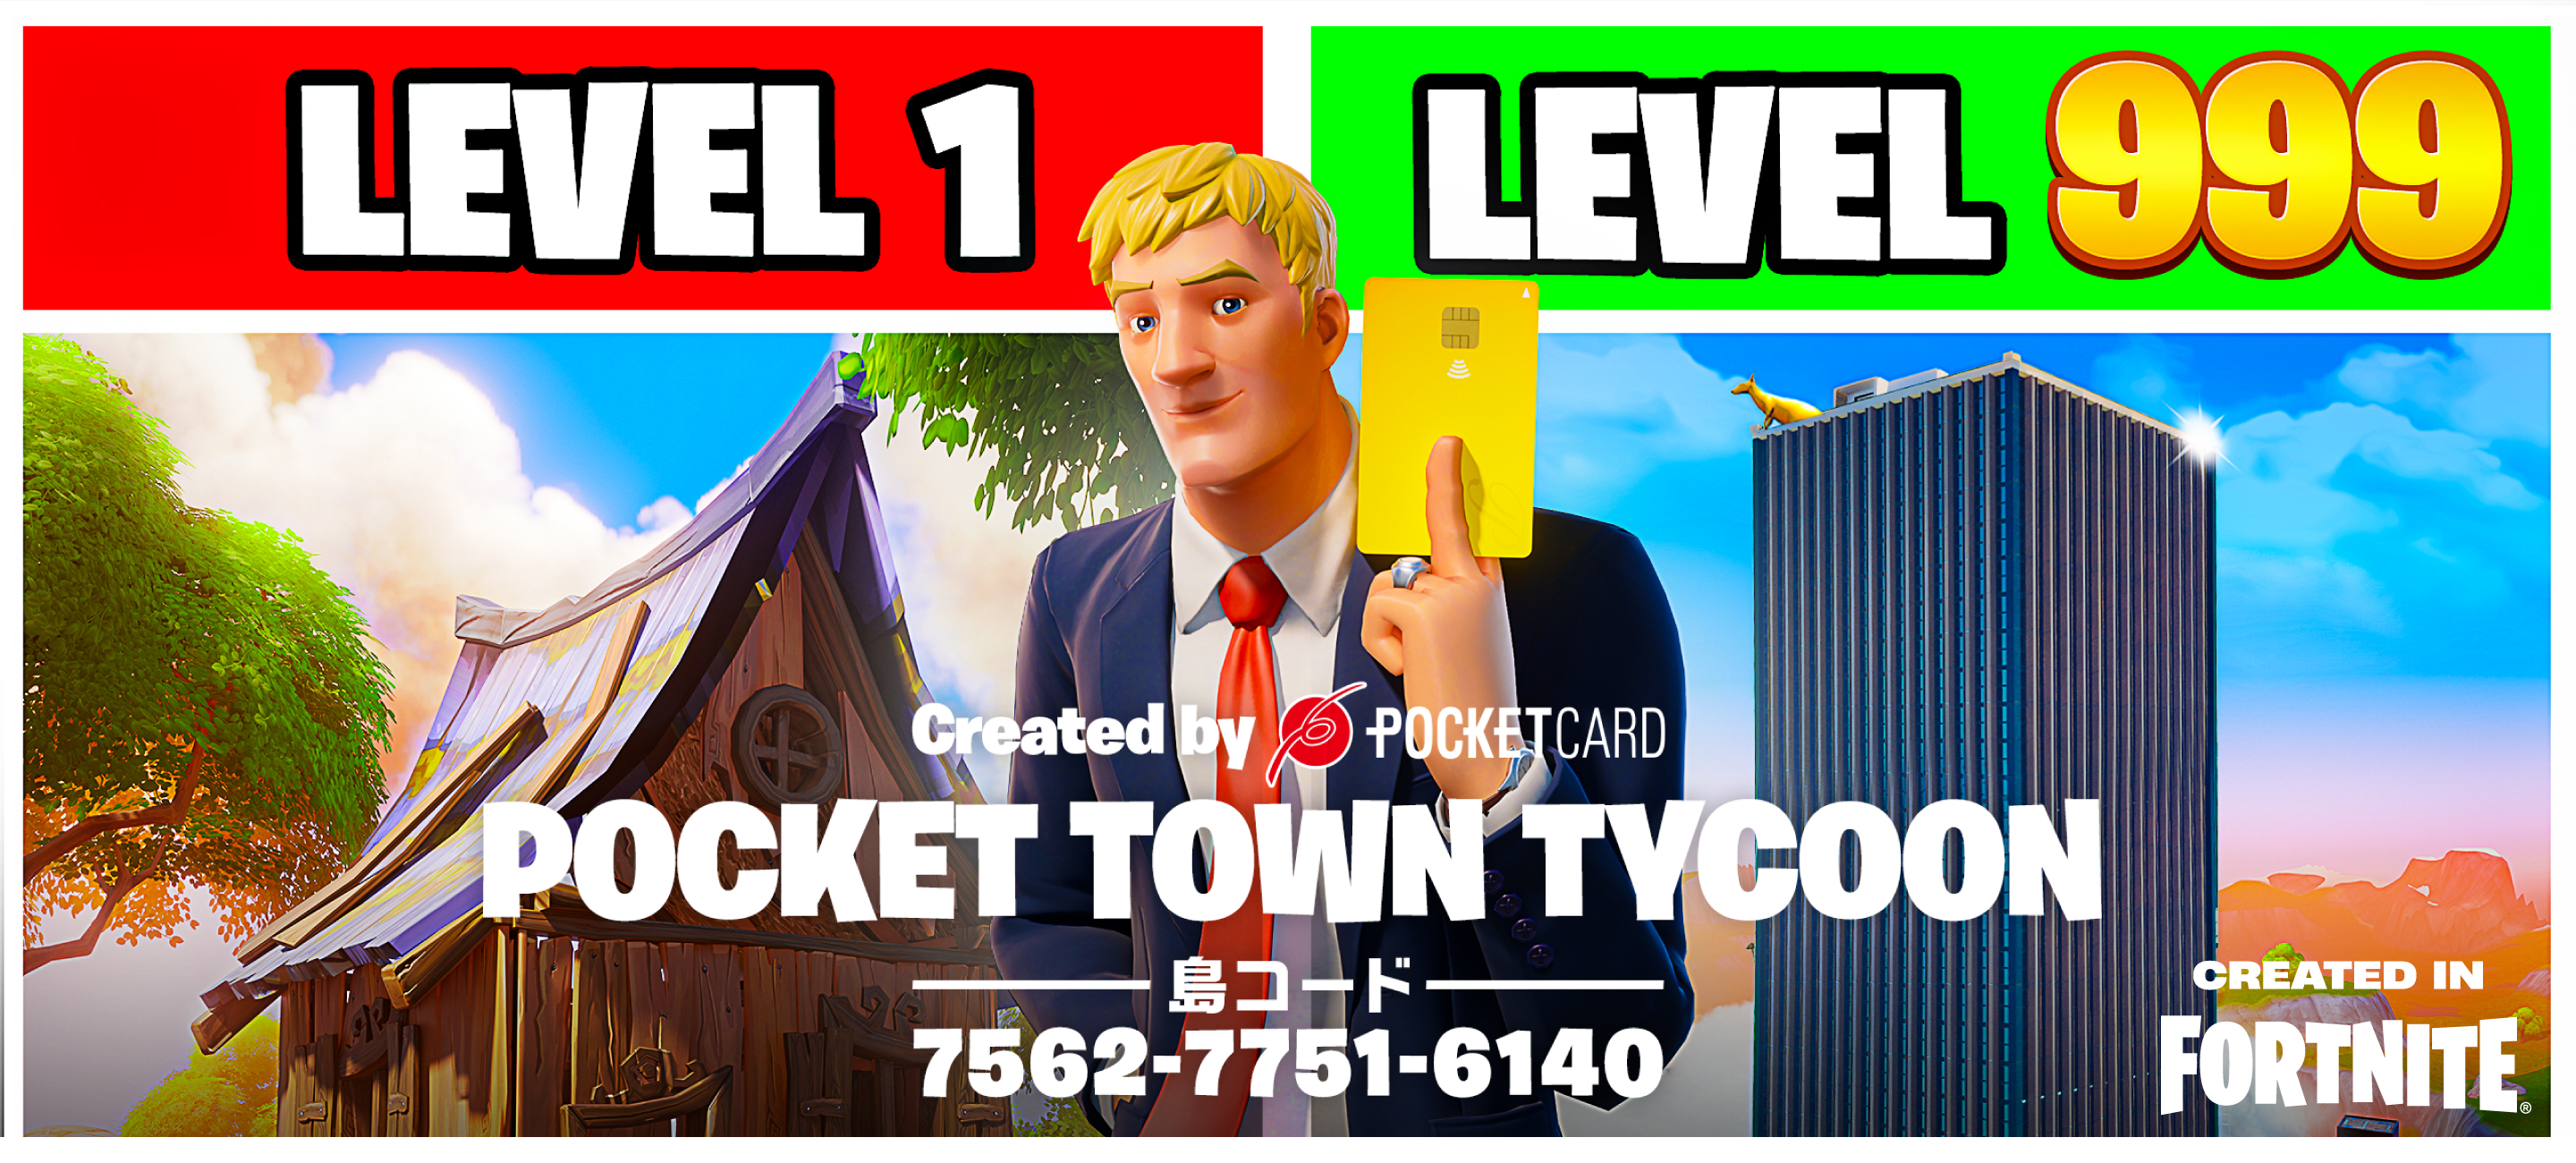 POCKET TOWN TYCOON